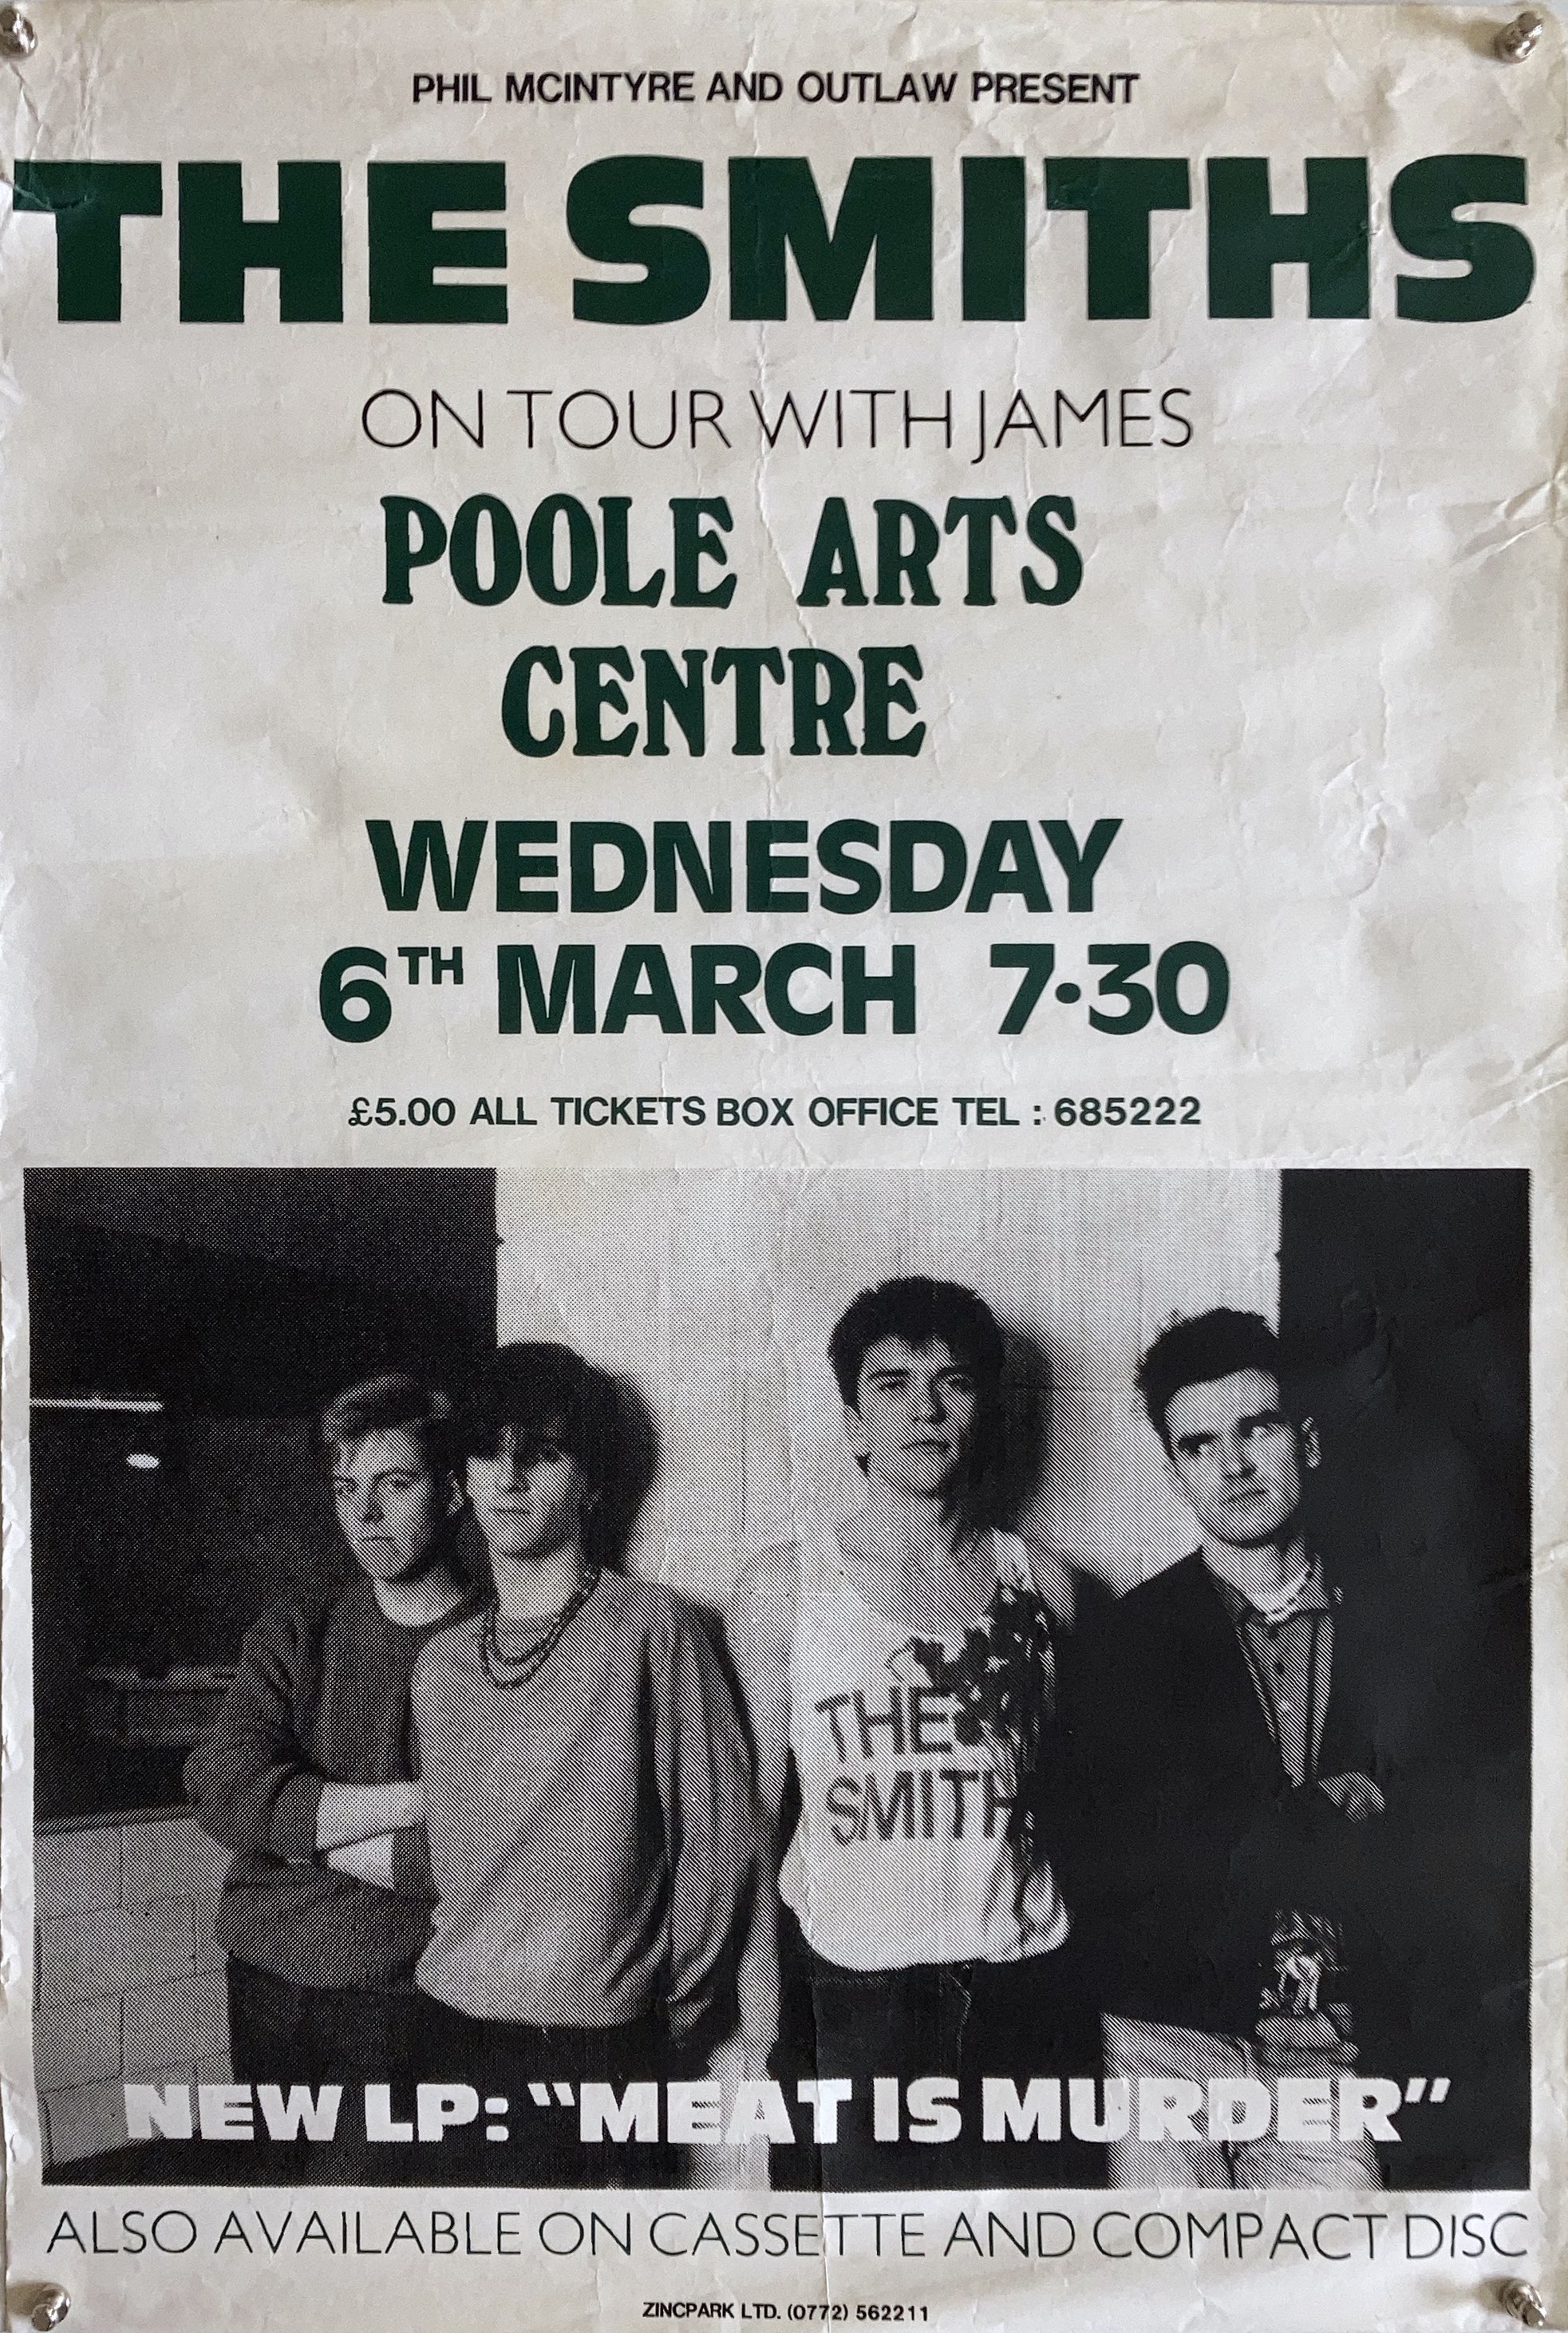 Lot 520 THE SMITHS ON TOUR WITH JAMES POOLE POSTER.